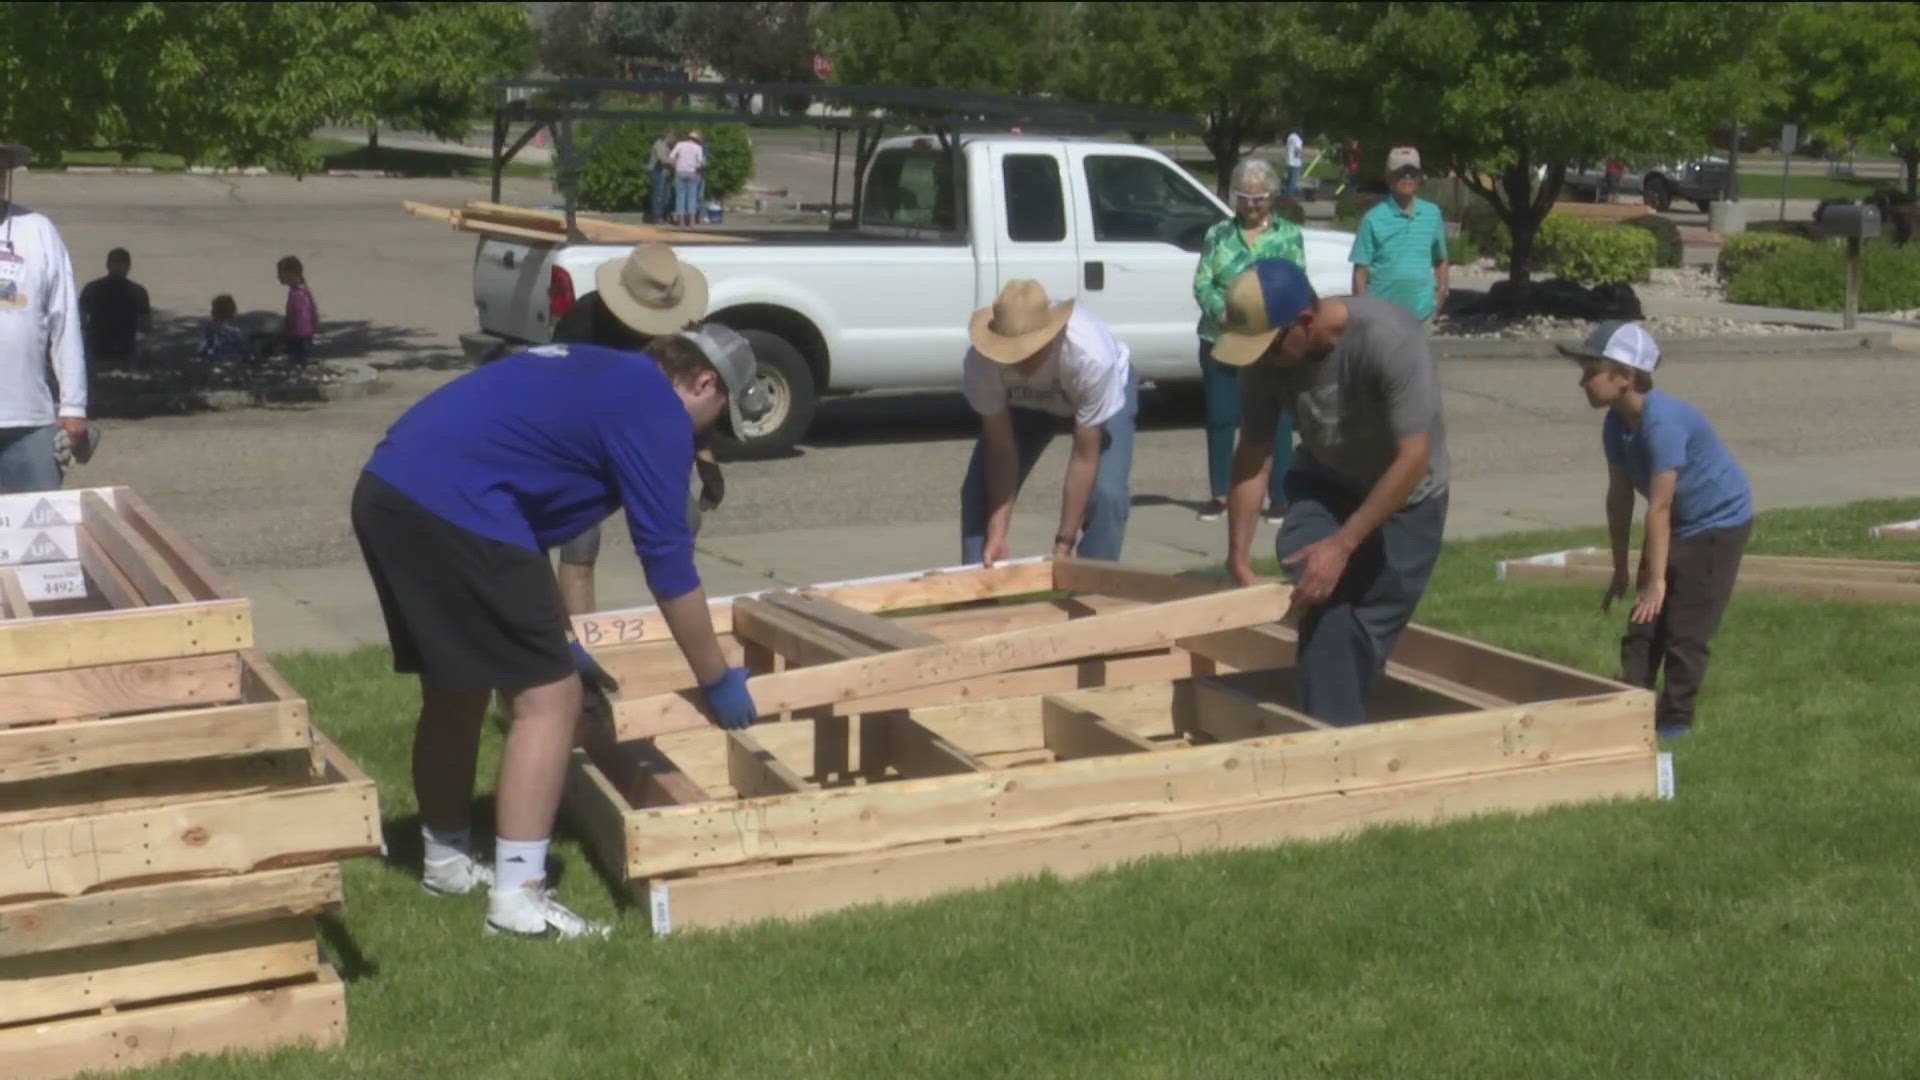 Every year, members of Cathedral of the Rockies gather to frame a house for Boise Valley Habitat for Humanity.